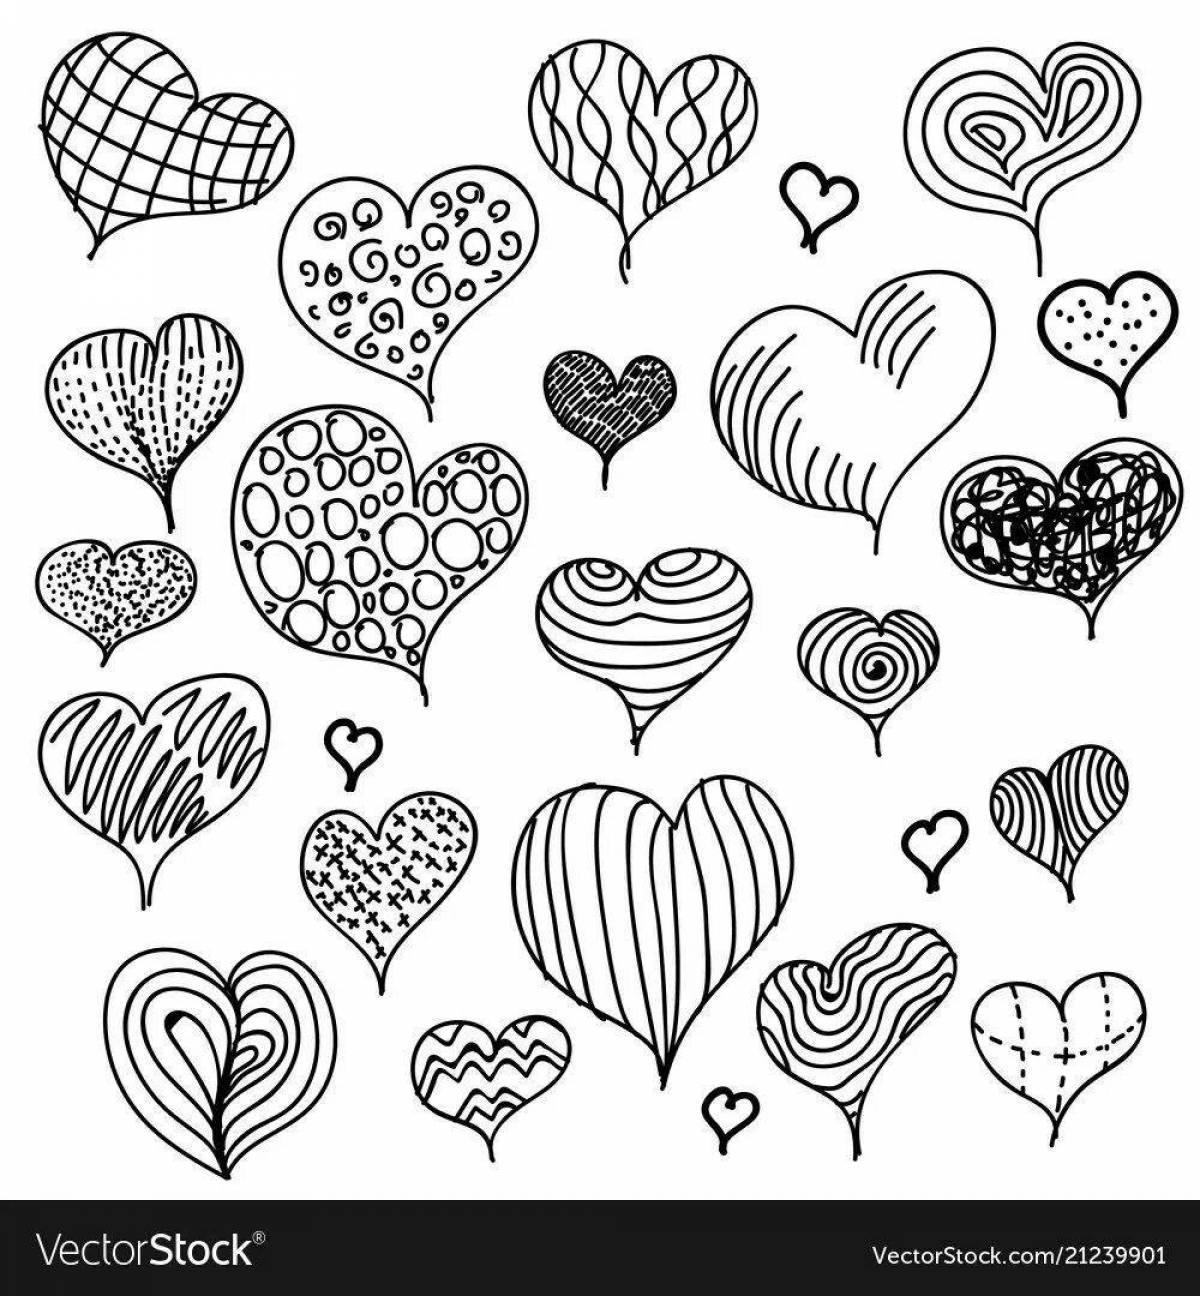 Coloring book shining little hearts